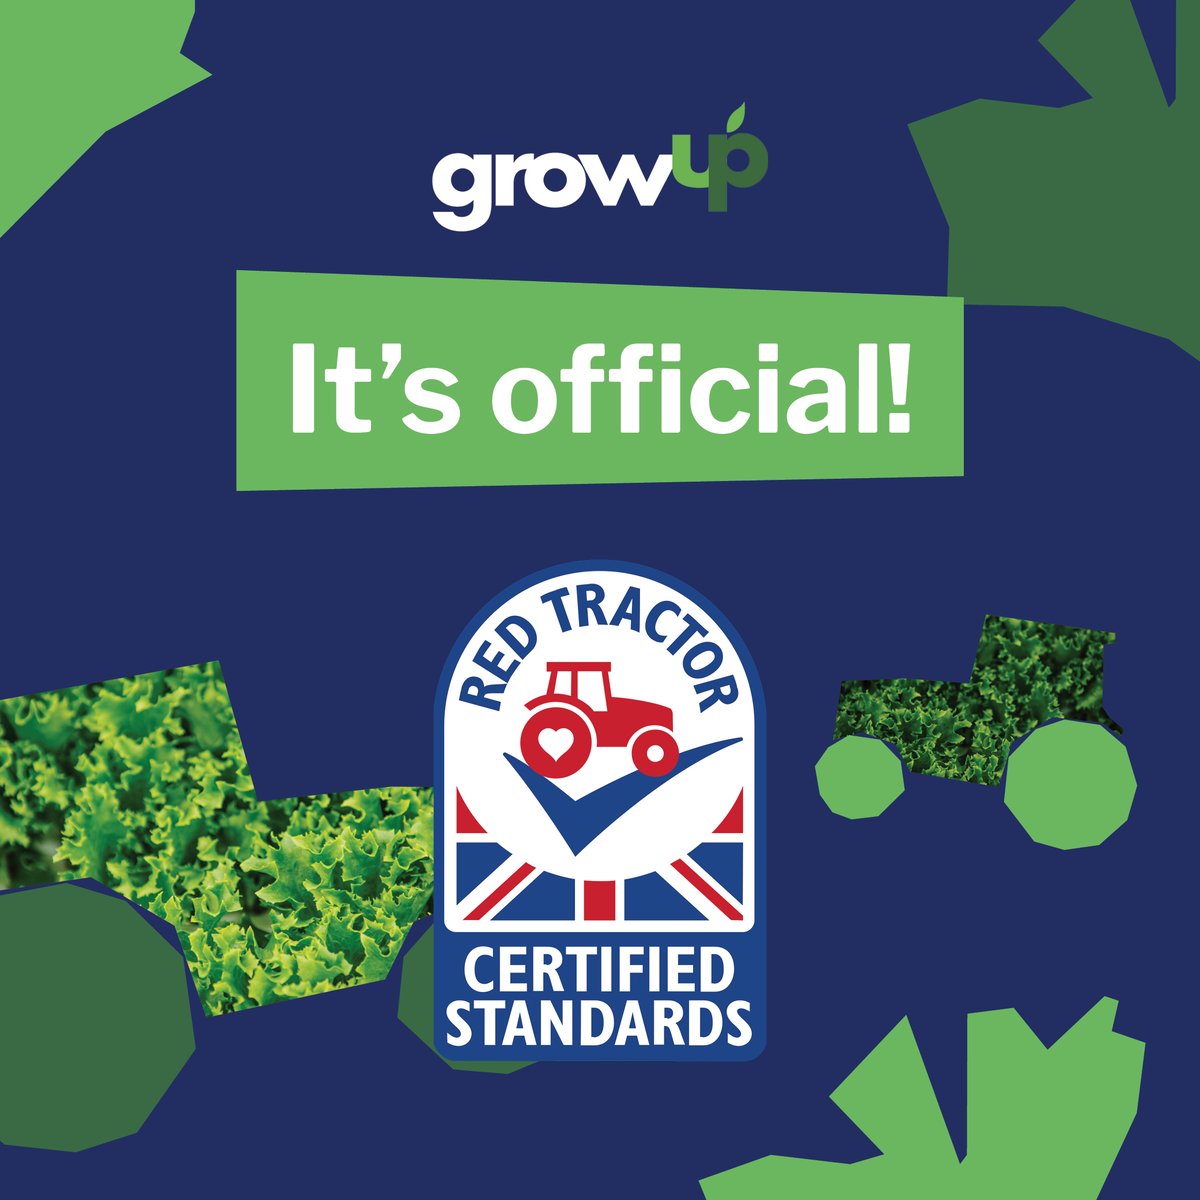 We're thrilled to announce that we've officially received our Red Tractor certification! 🚜 #RedTractorCertified #FreshAndCertified